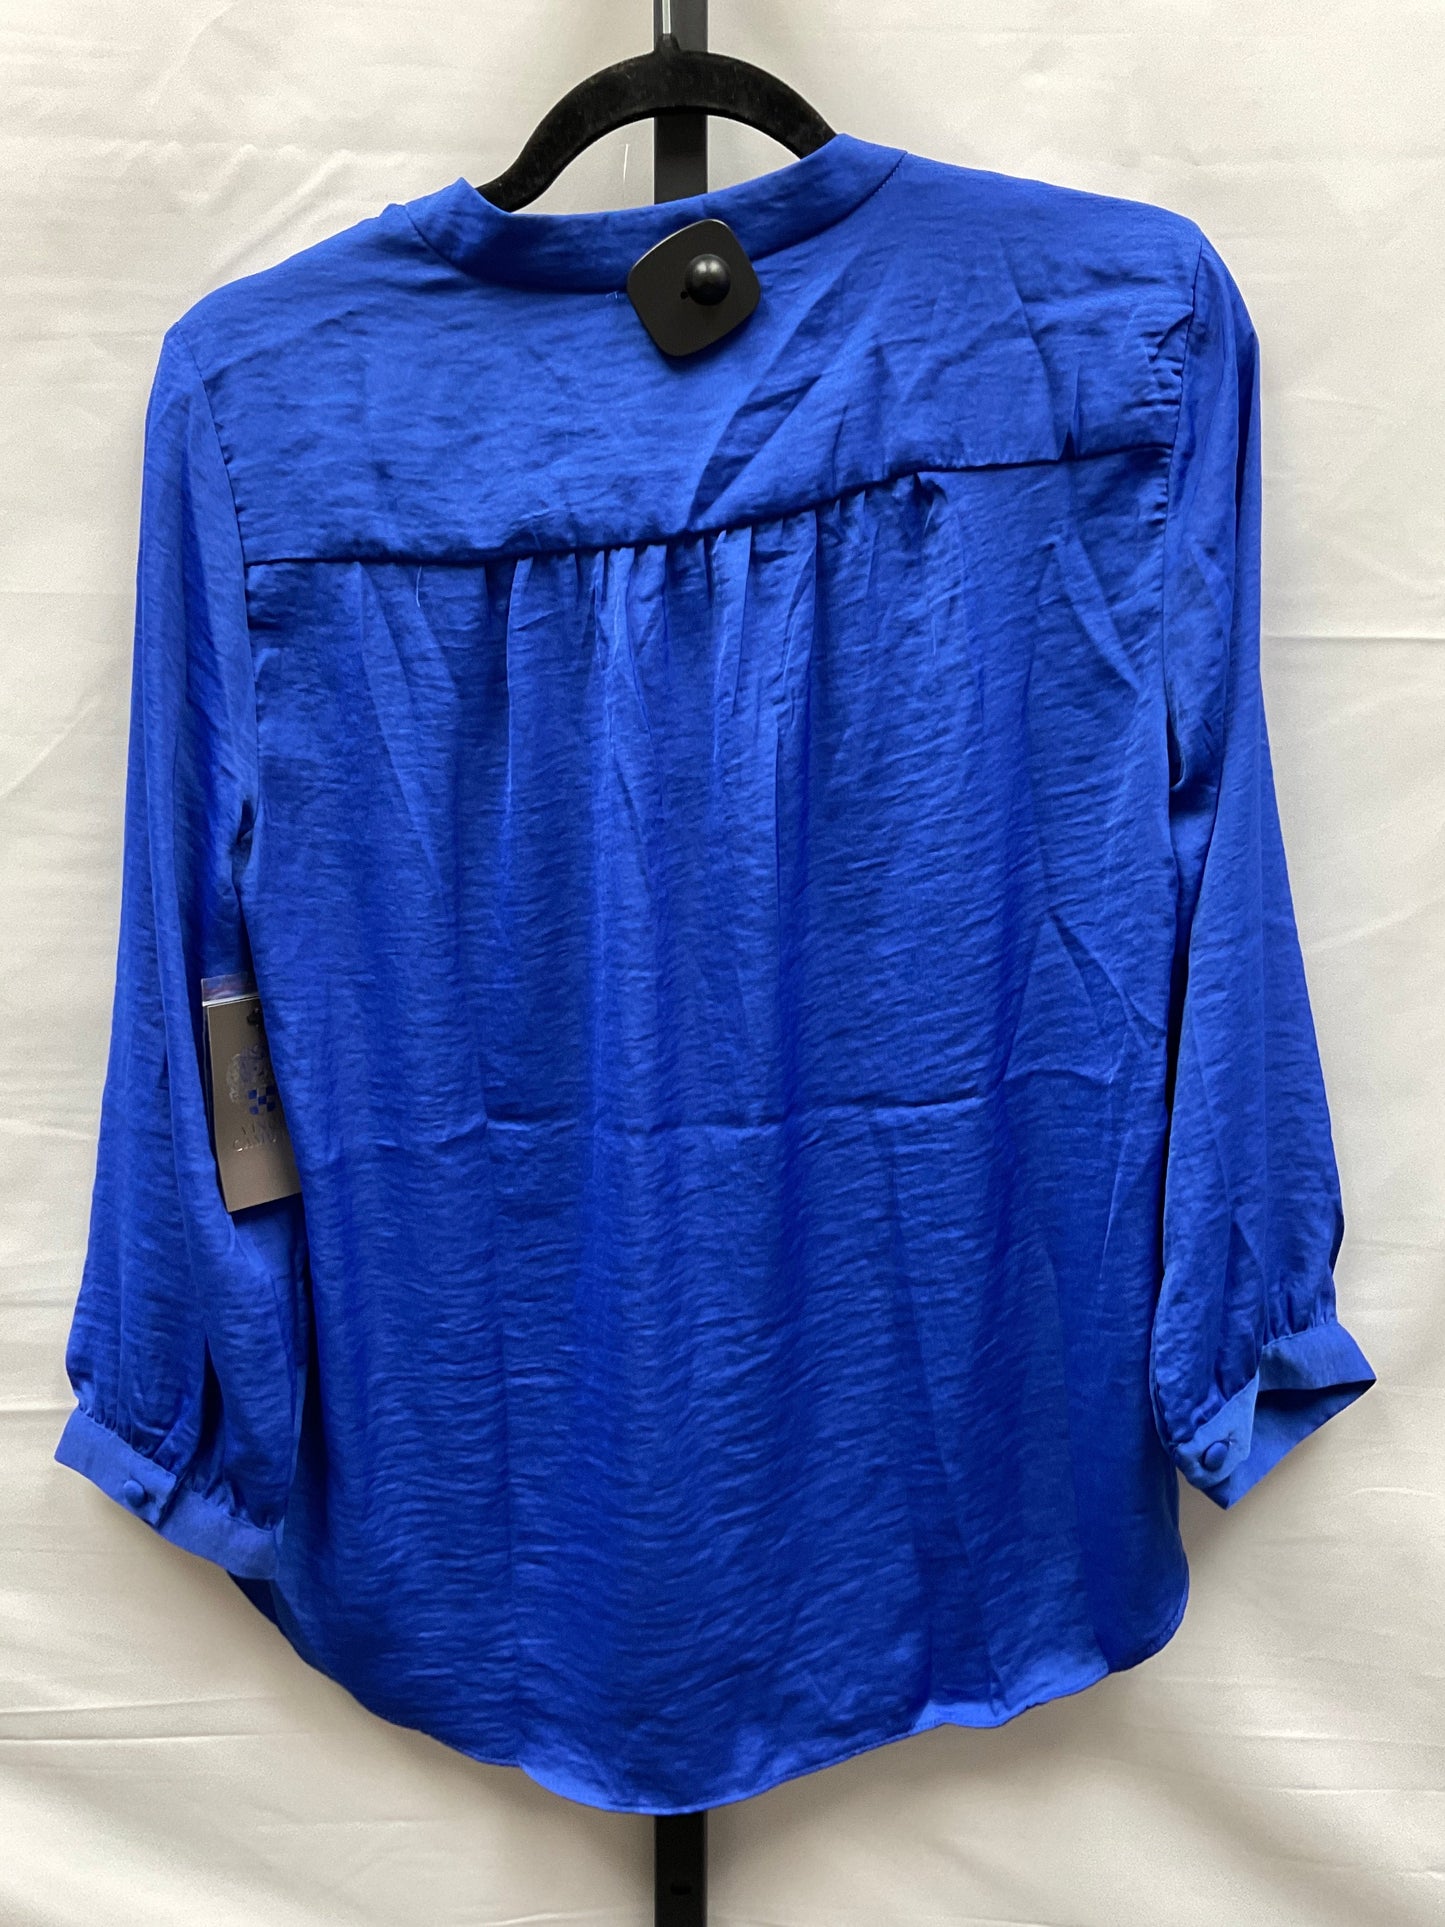 Blue Top Long Sleeve Vince Camuto, Size M